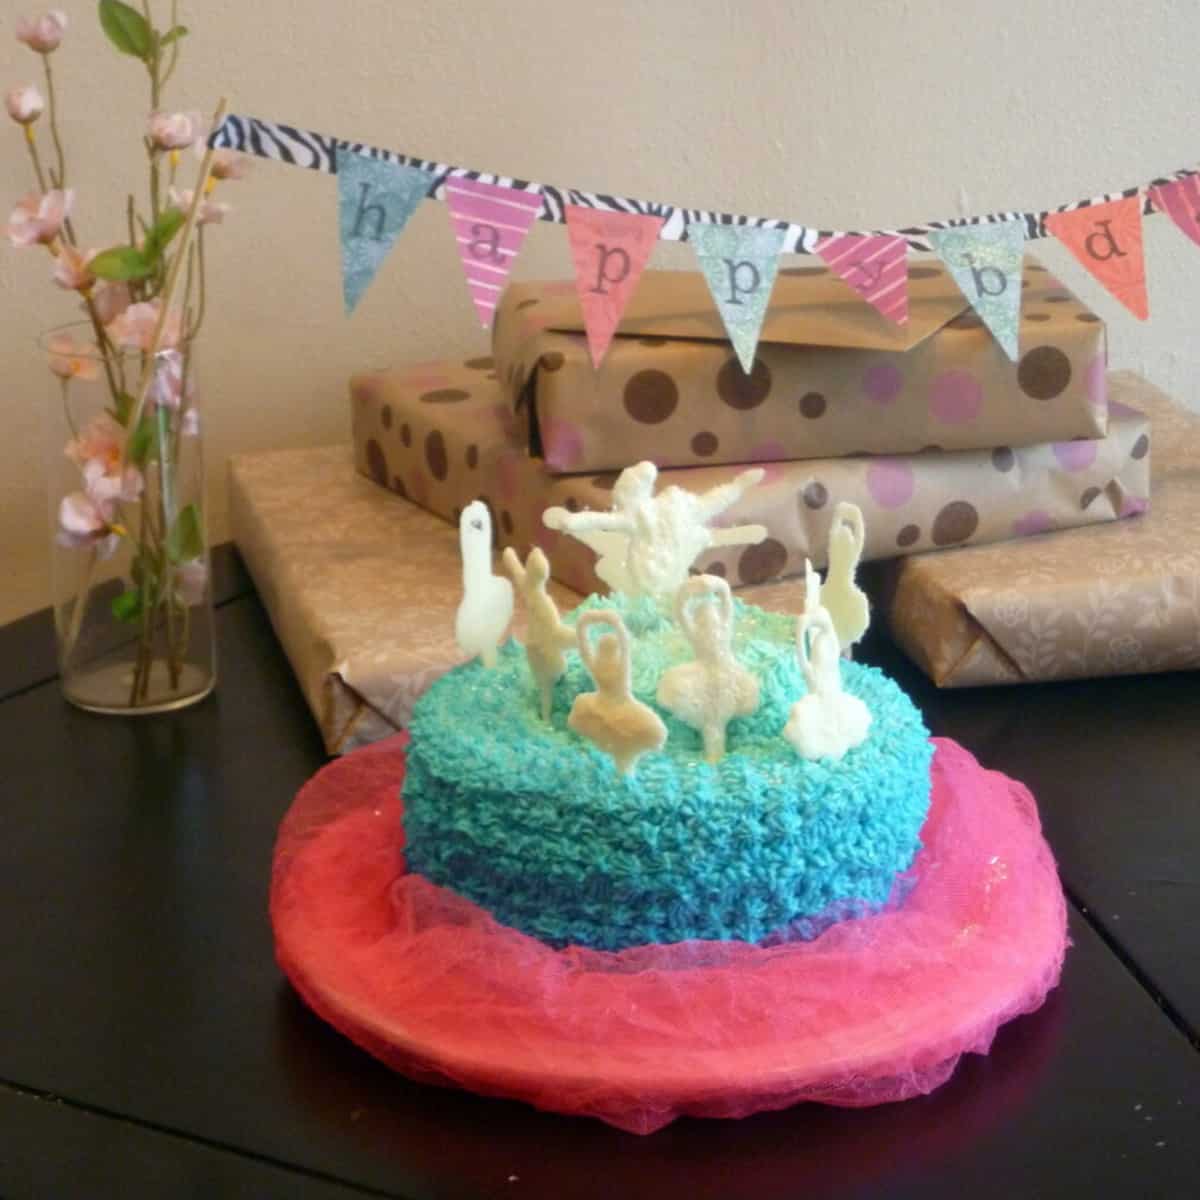 a picture of a ballerina cake with edible glitter on top. The cake is surrounded by a happy birthday banner and presents. 